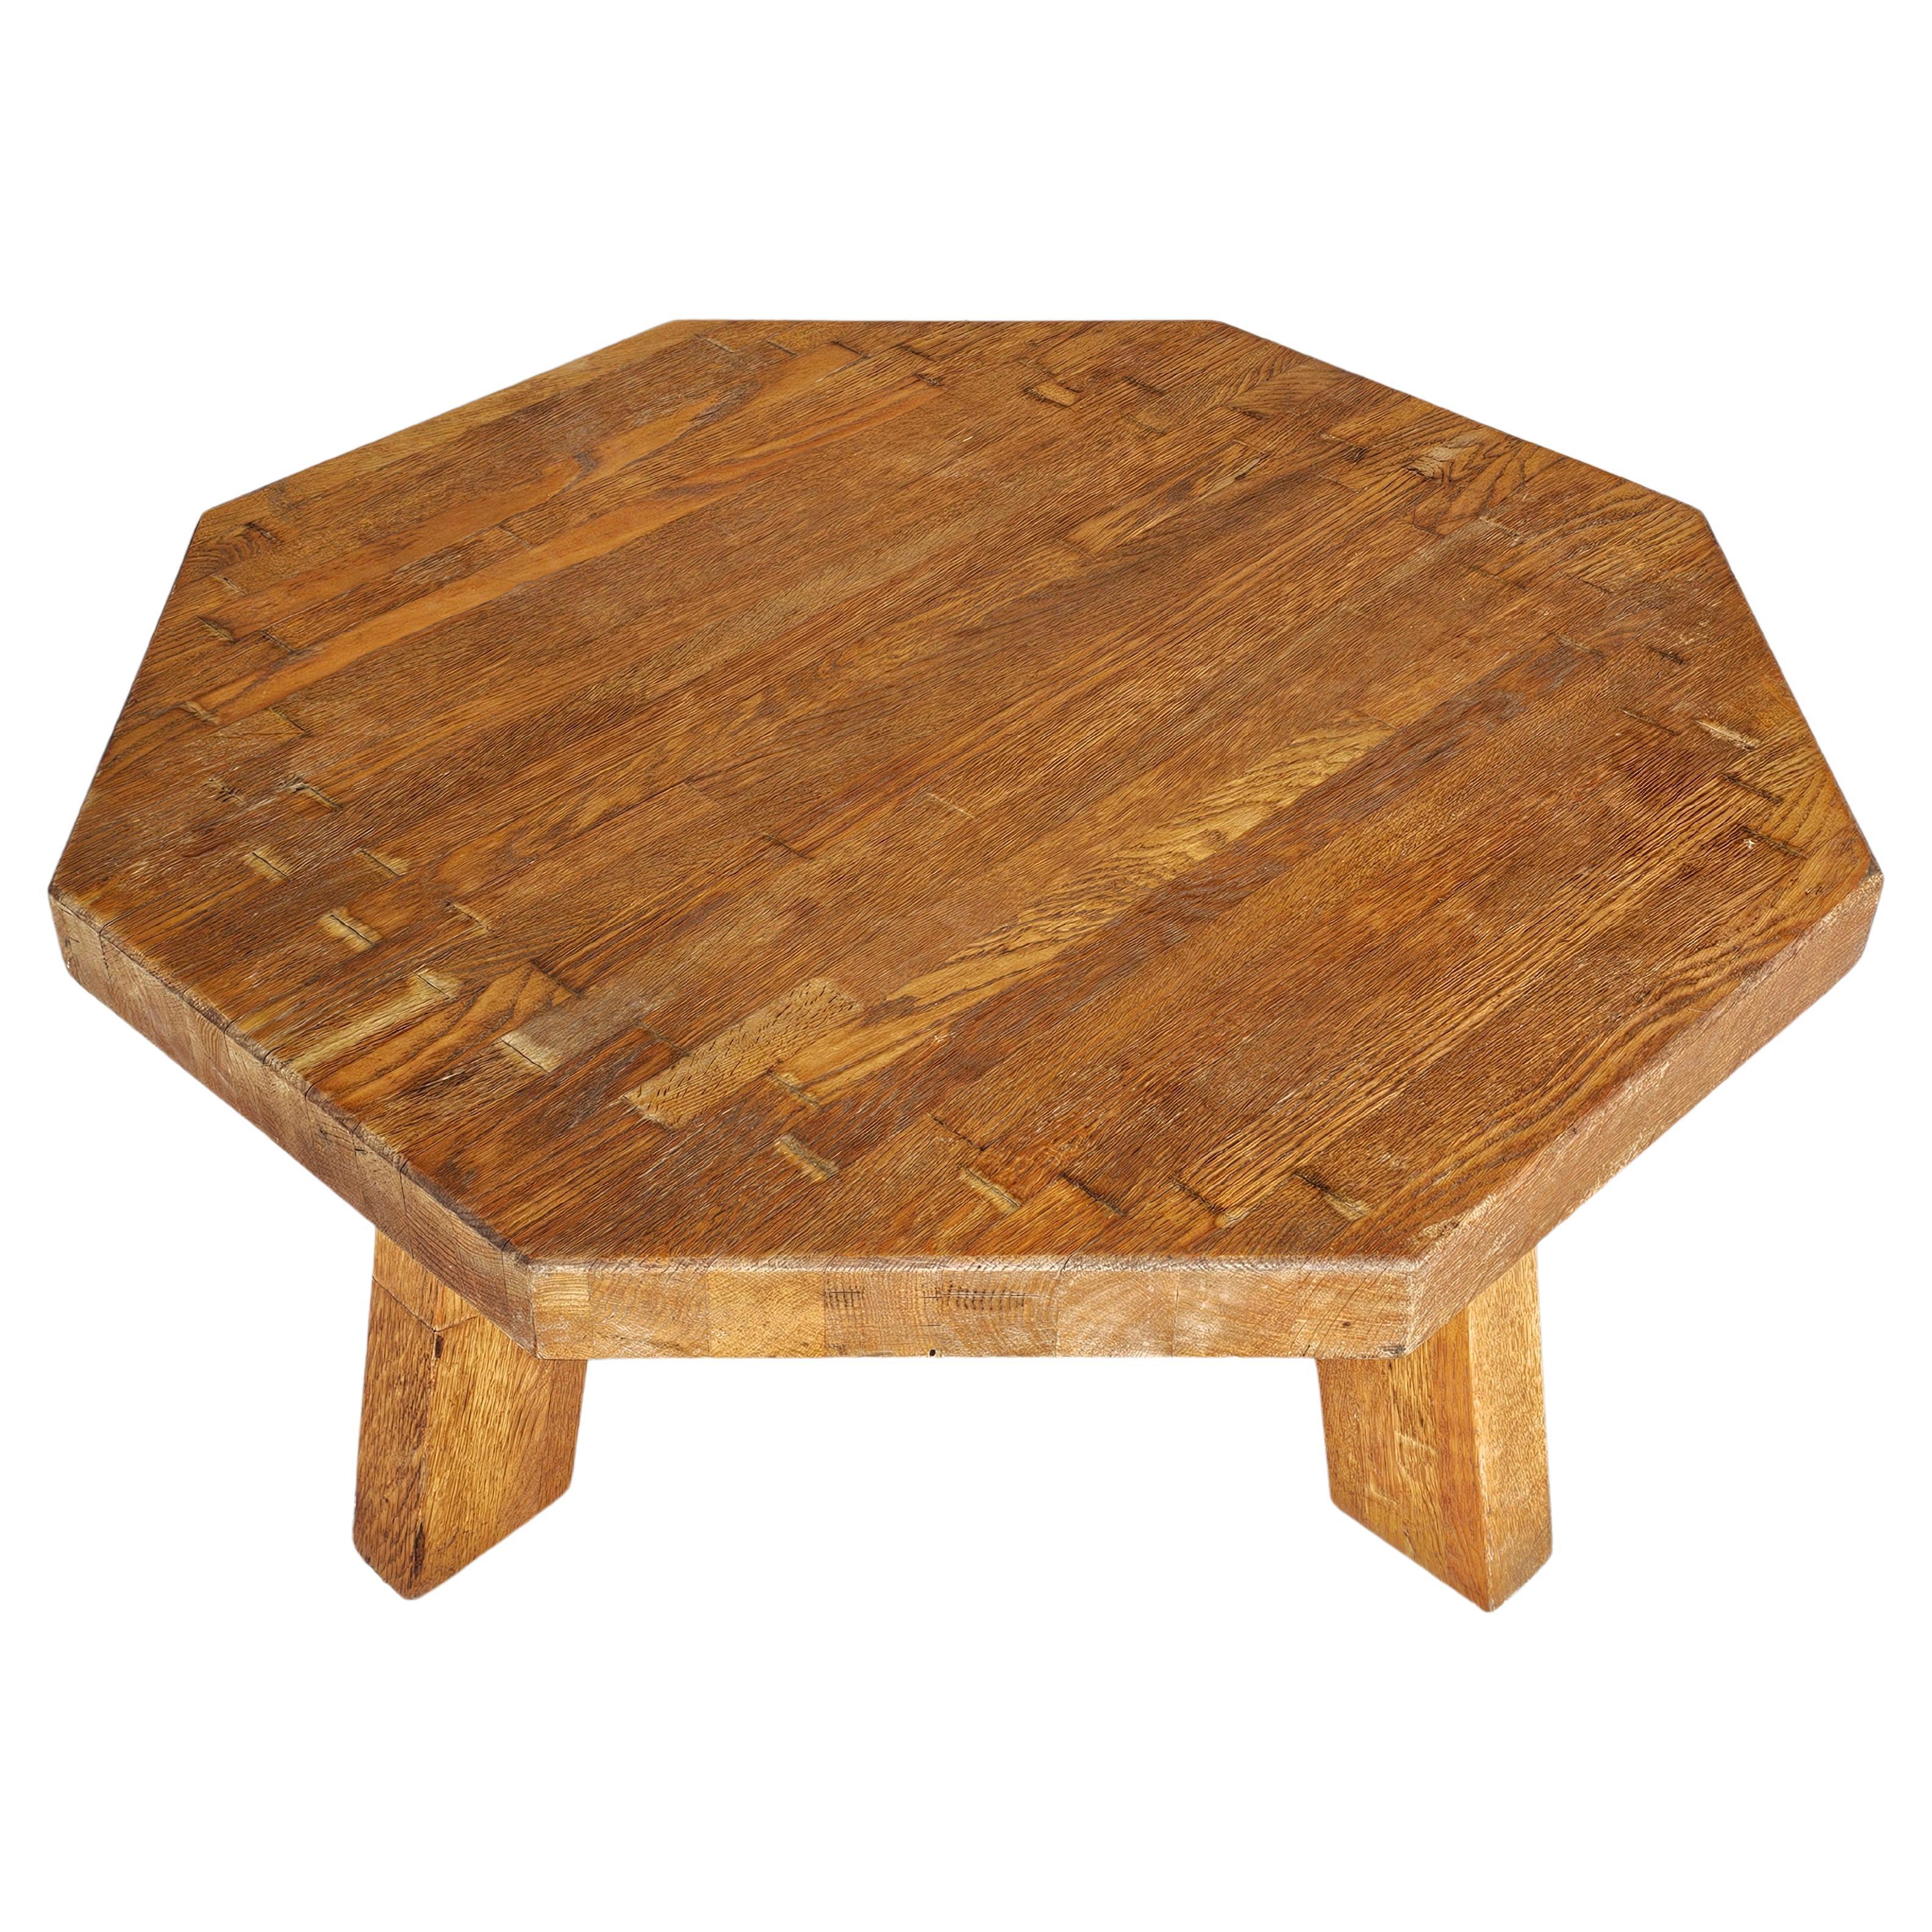 Large Brutalist Octagonal Coffee Table done in Solid Oak, Netherlands 1960s For Sale